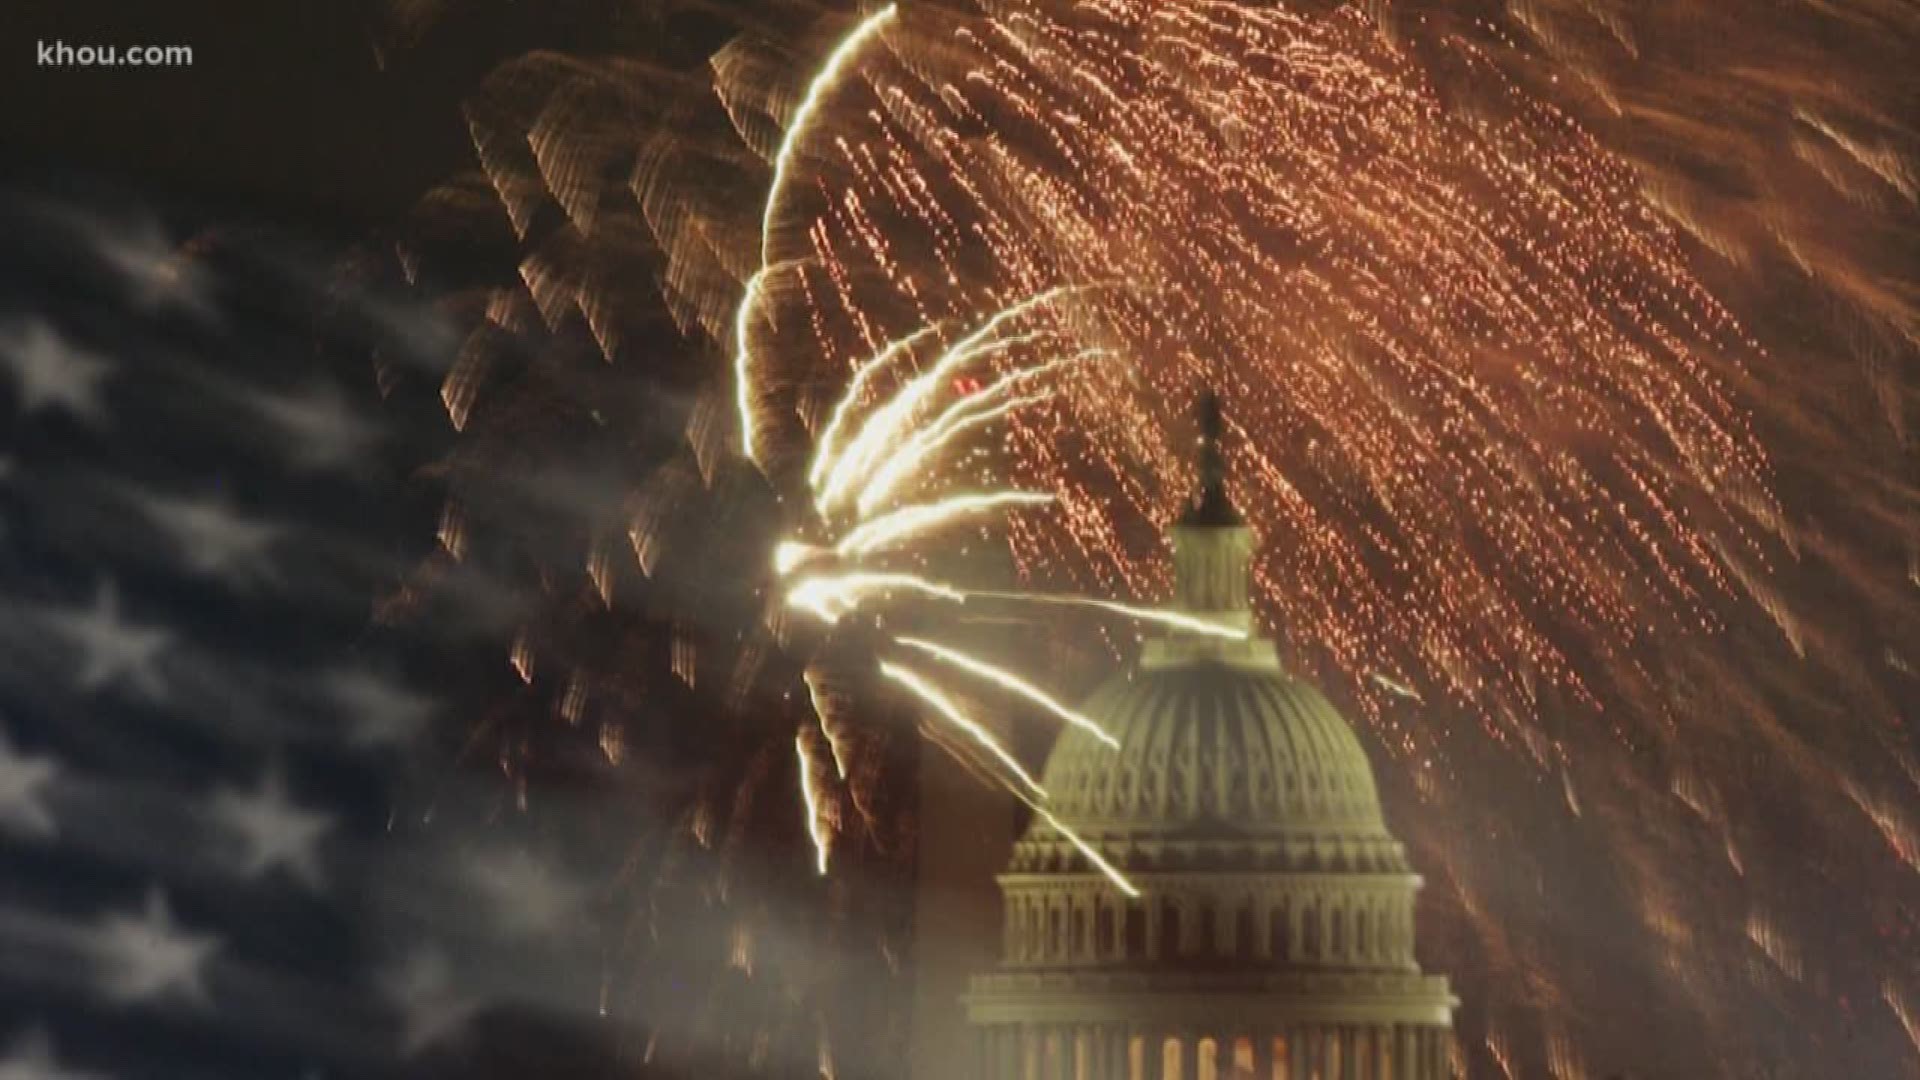 Why do we celebrate the 4th of July with fireworks? Well, we can thank one of America's founders for that.